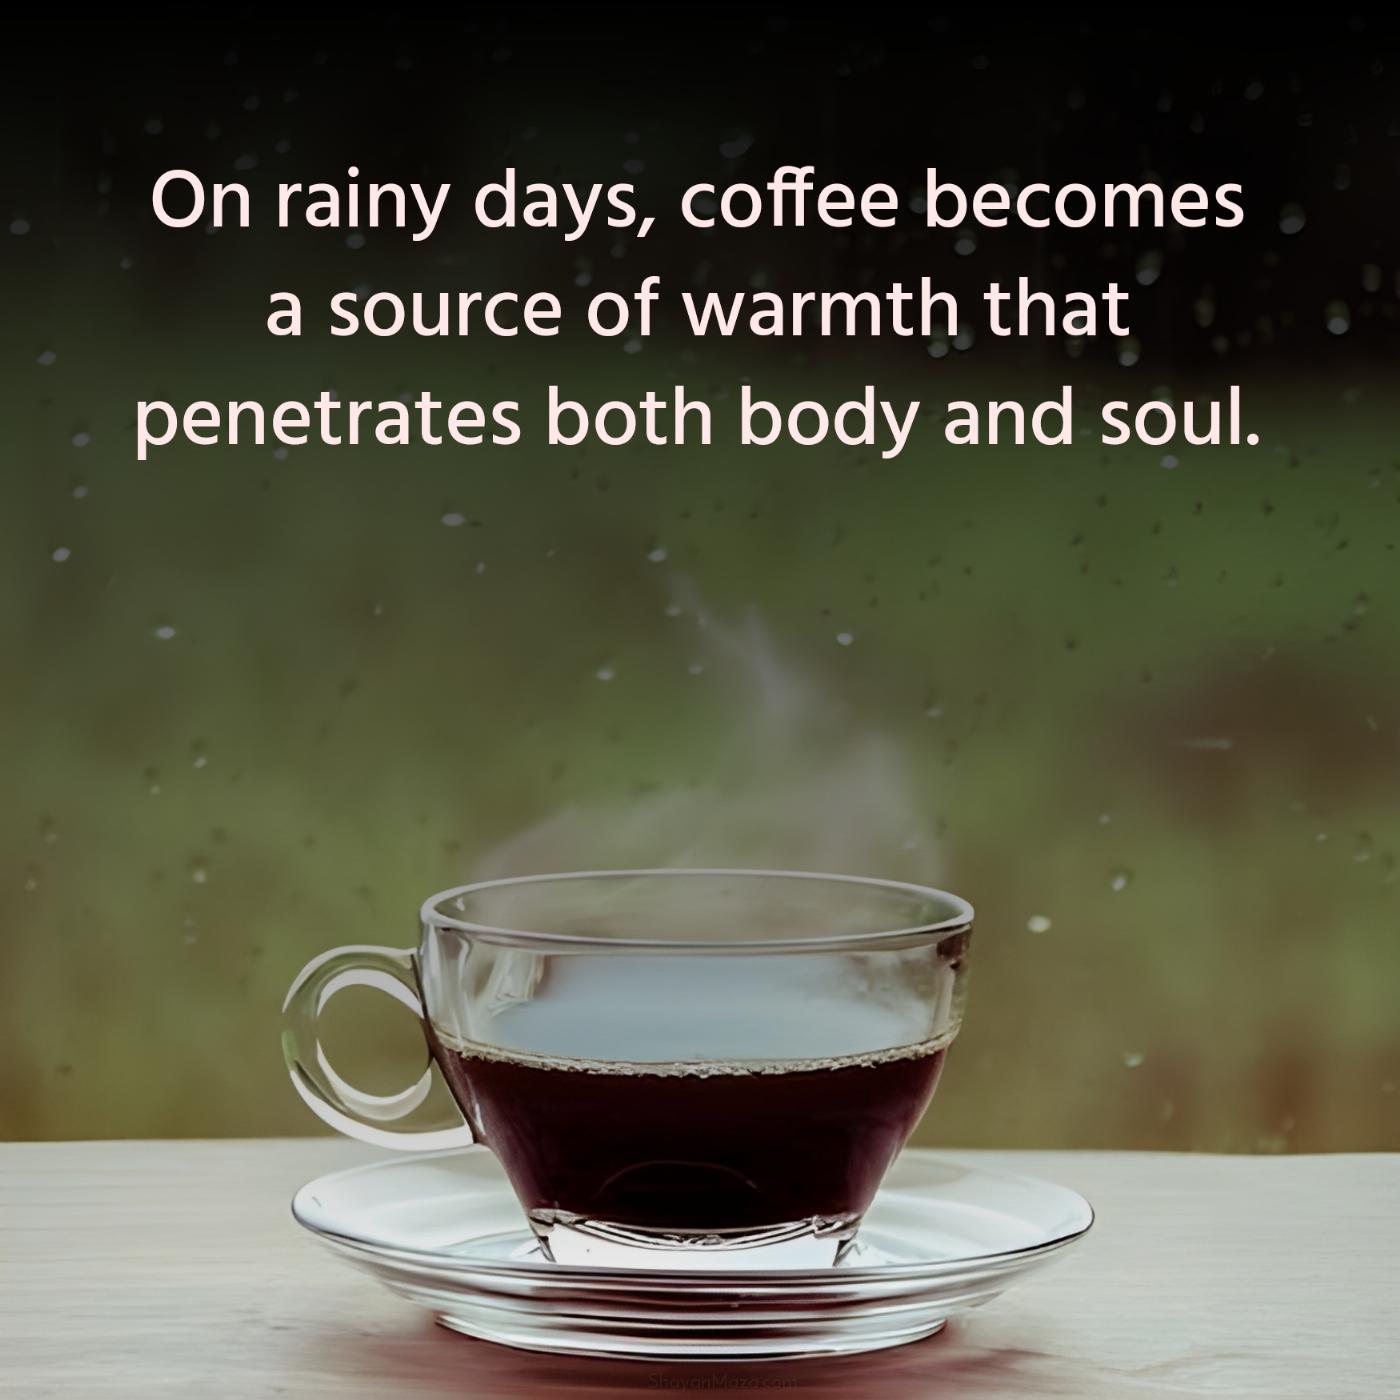 On rainy days coffee becomes a source of warmth